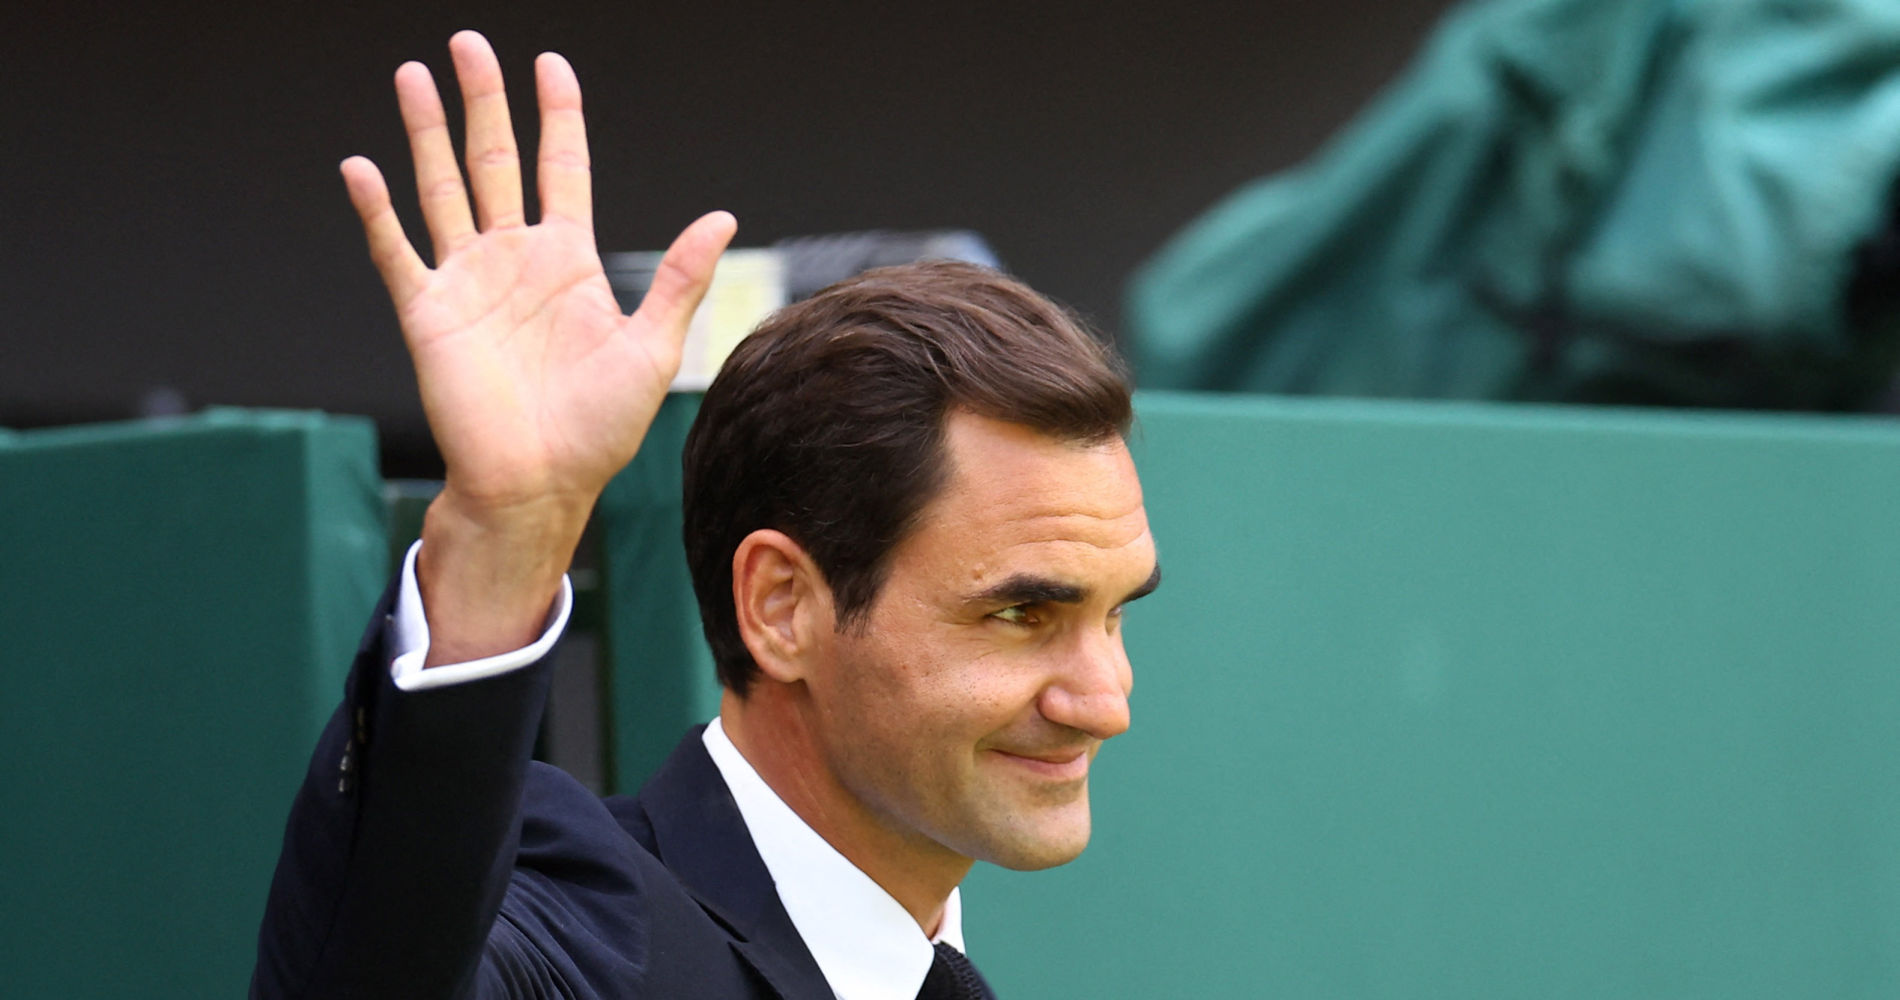 Roger Federer at Wimbledon in 2022 | © Panoramic